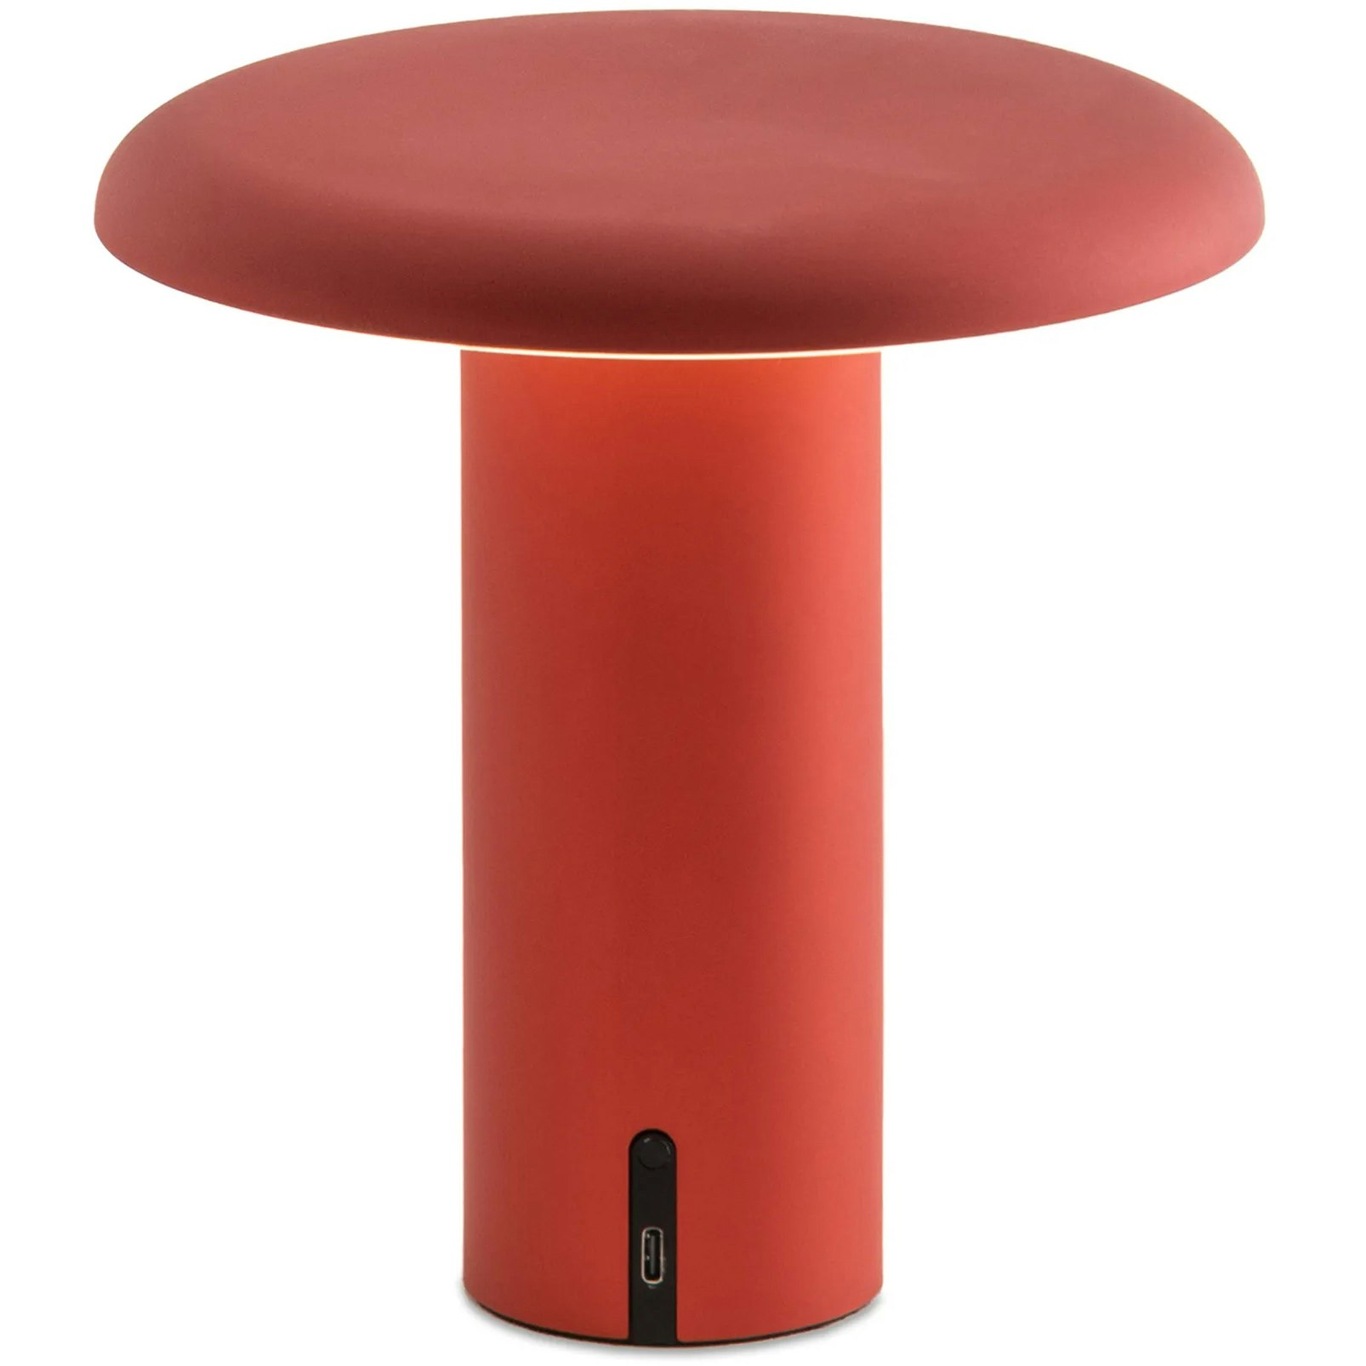 Takku Table Lamp Portable, Anodized Red